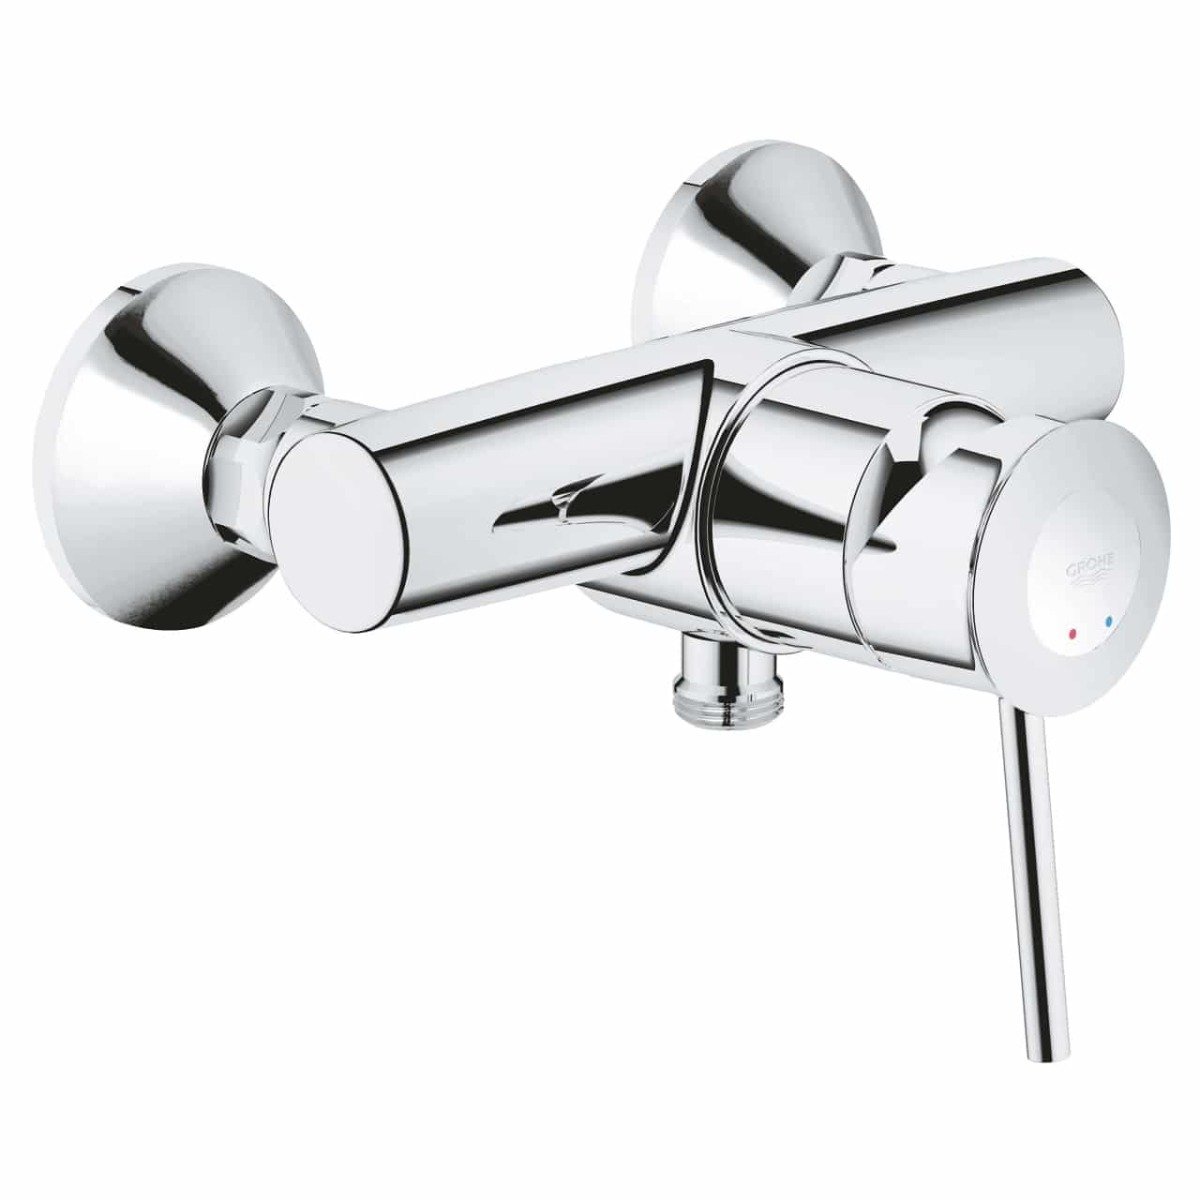 Poza Baterie baie cabina dus Grohe Start Classic,montare pe perete, crom-23786000